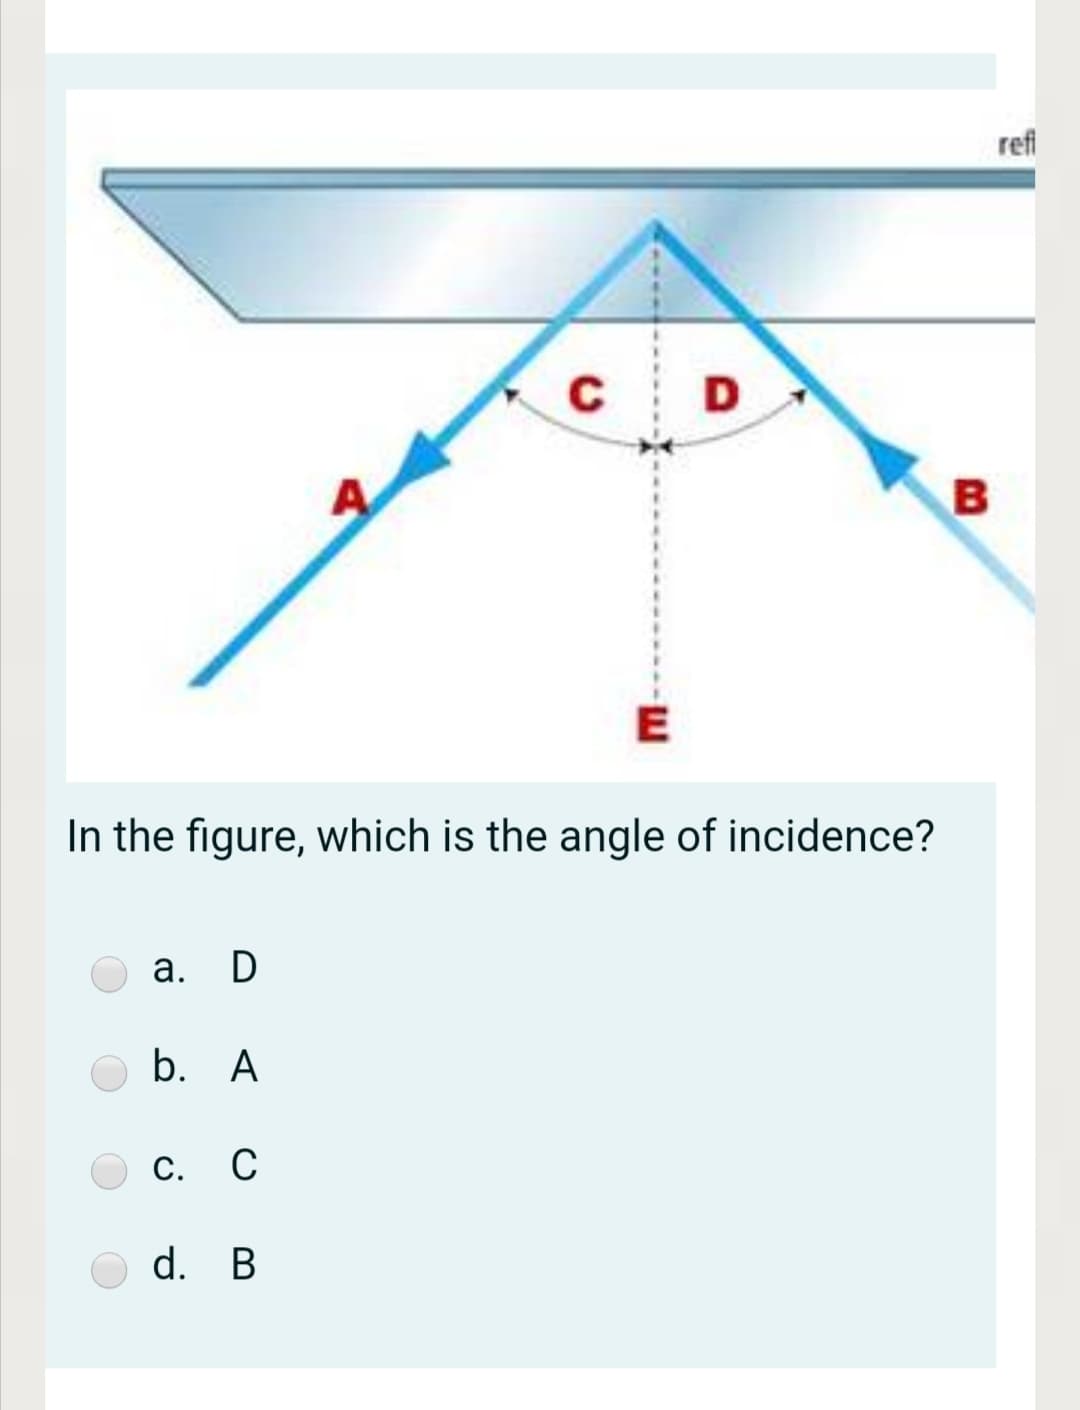 refi
C D
E
In the figure, which is the angle of incidence?
а. D
b. A
С. С
d. B
